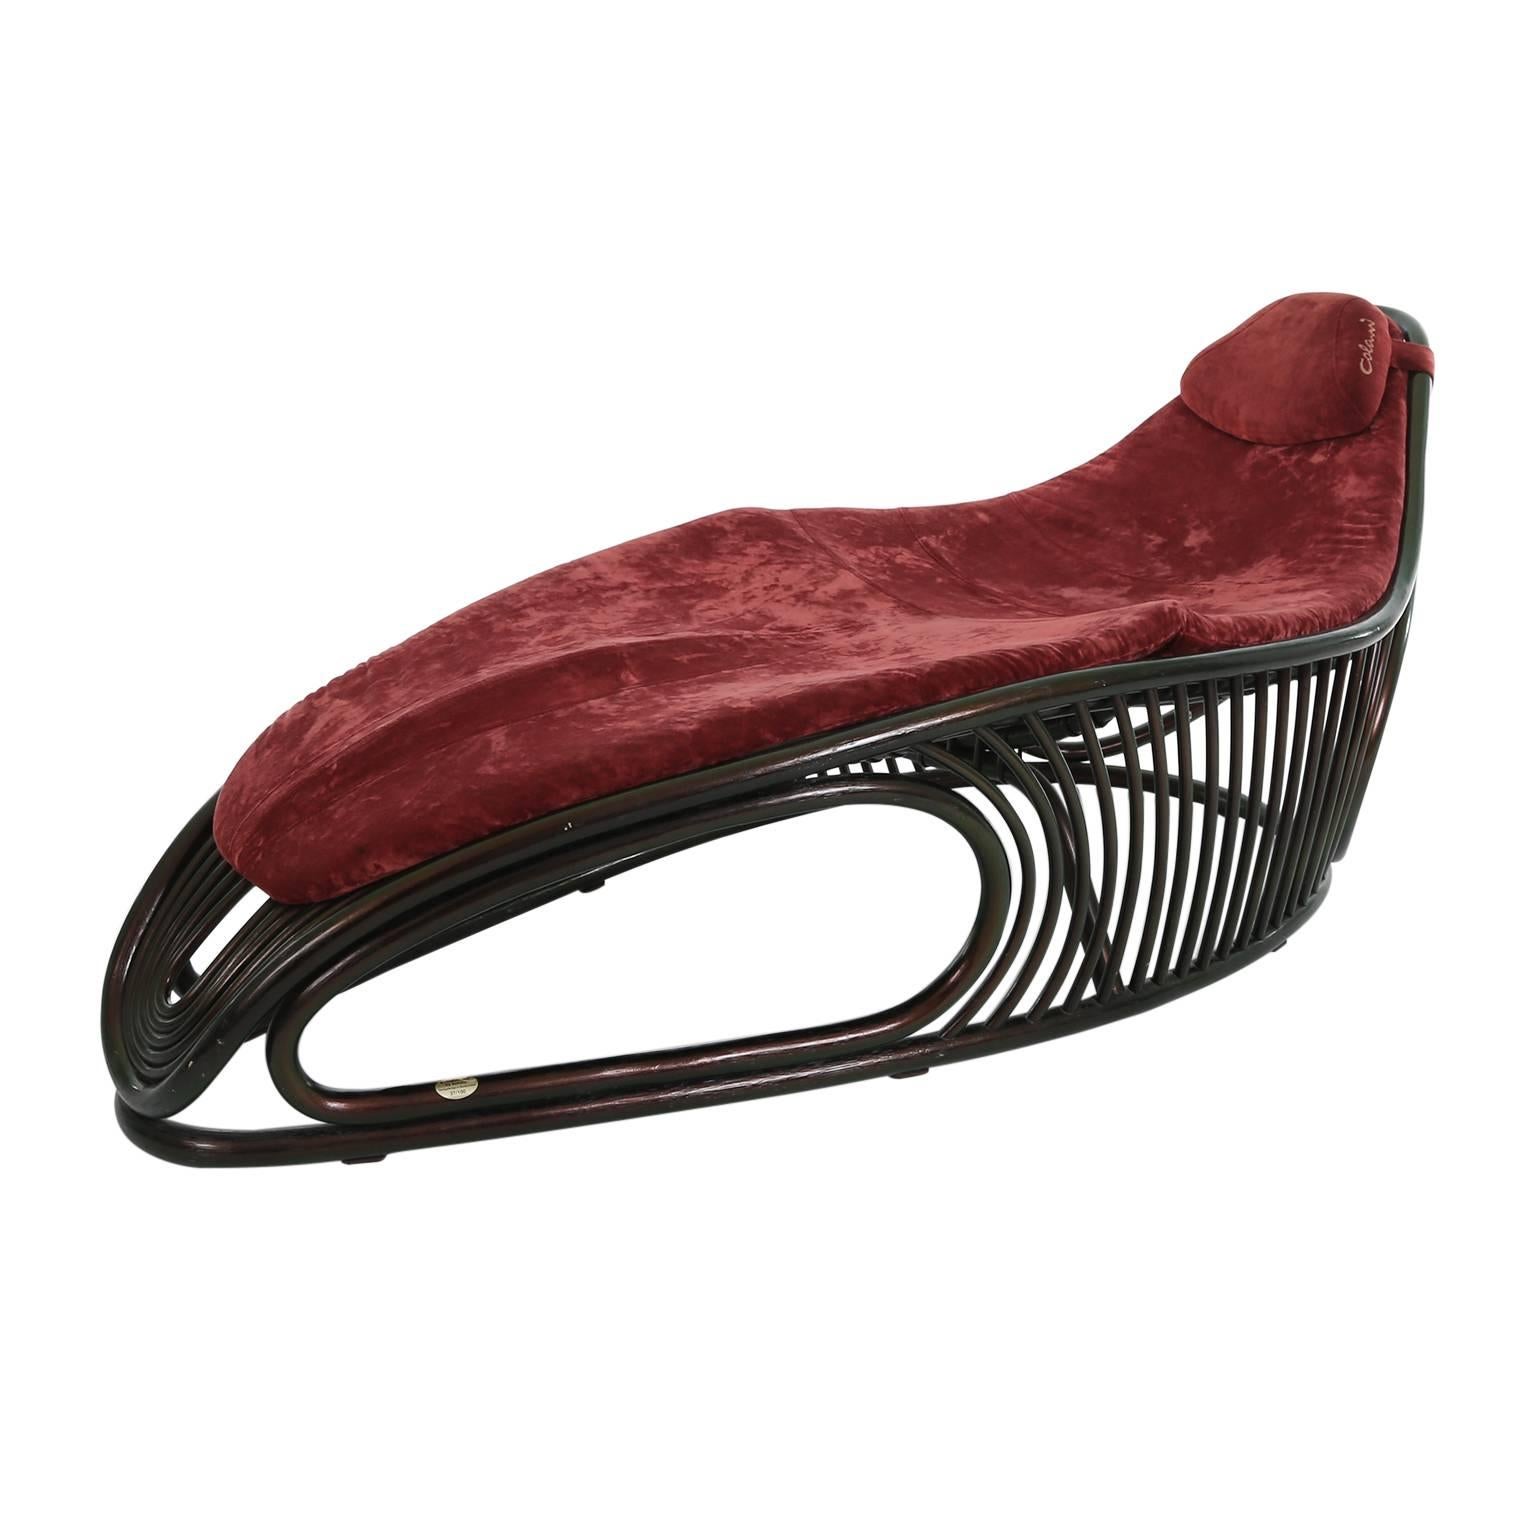 Chaise Longue or Daybed "Divan" Designed by Luigi Colani, 1990 For Sale